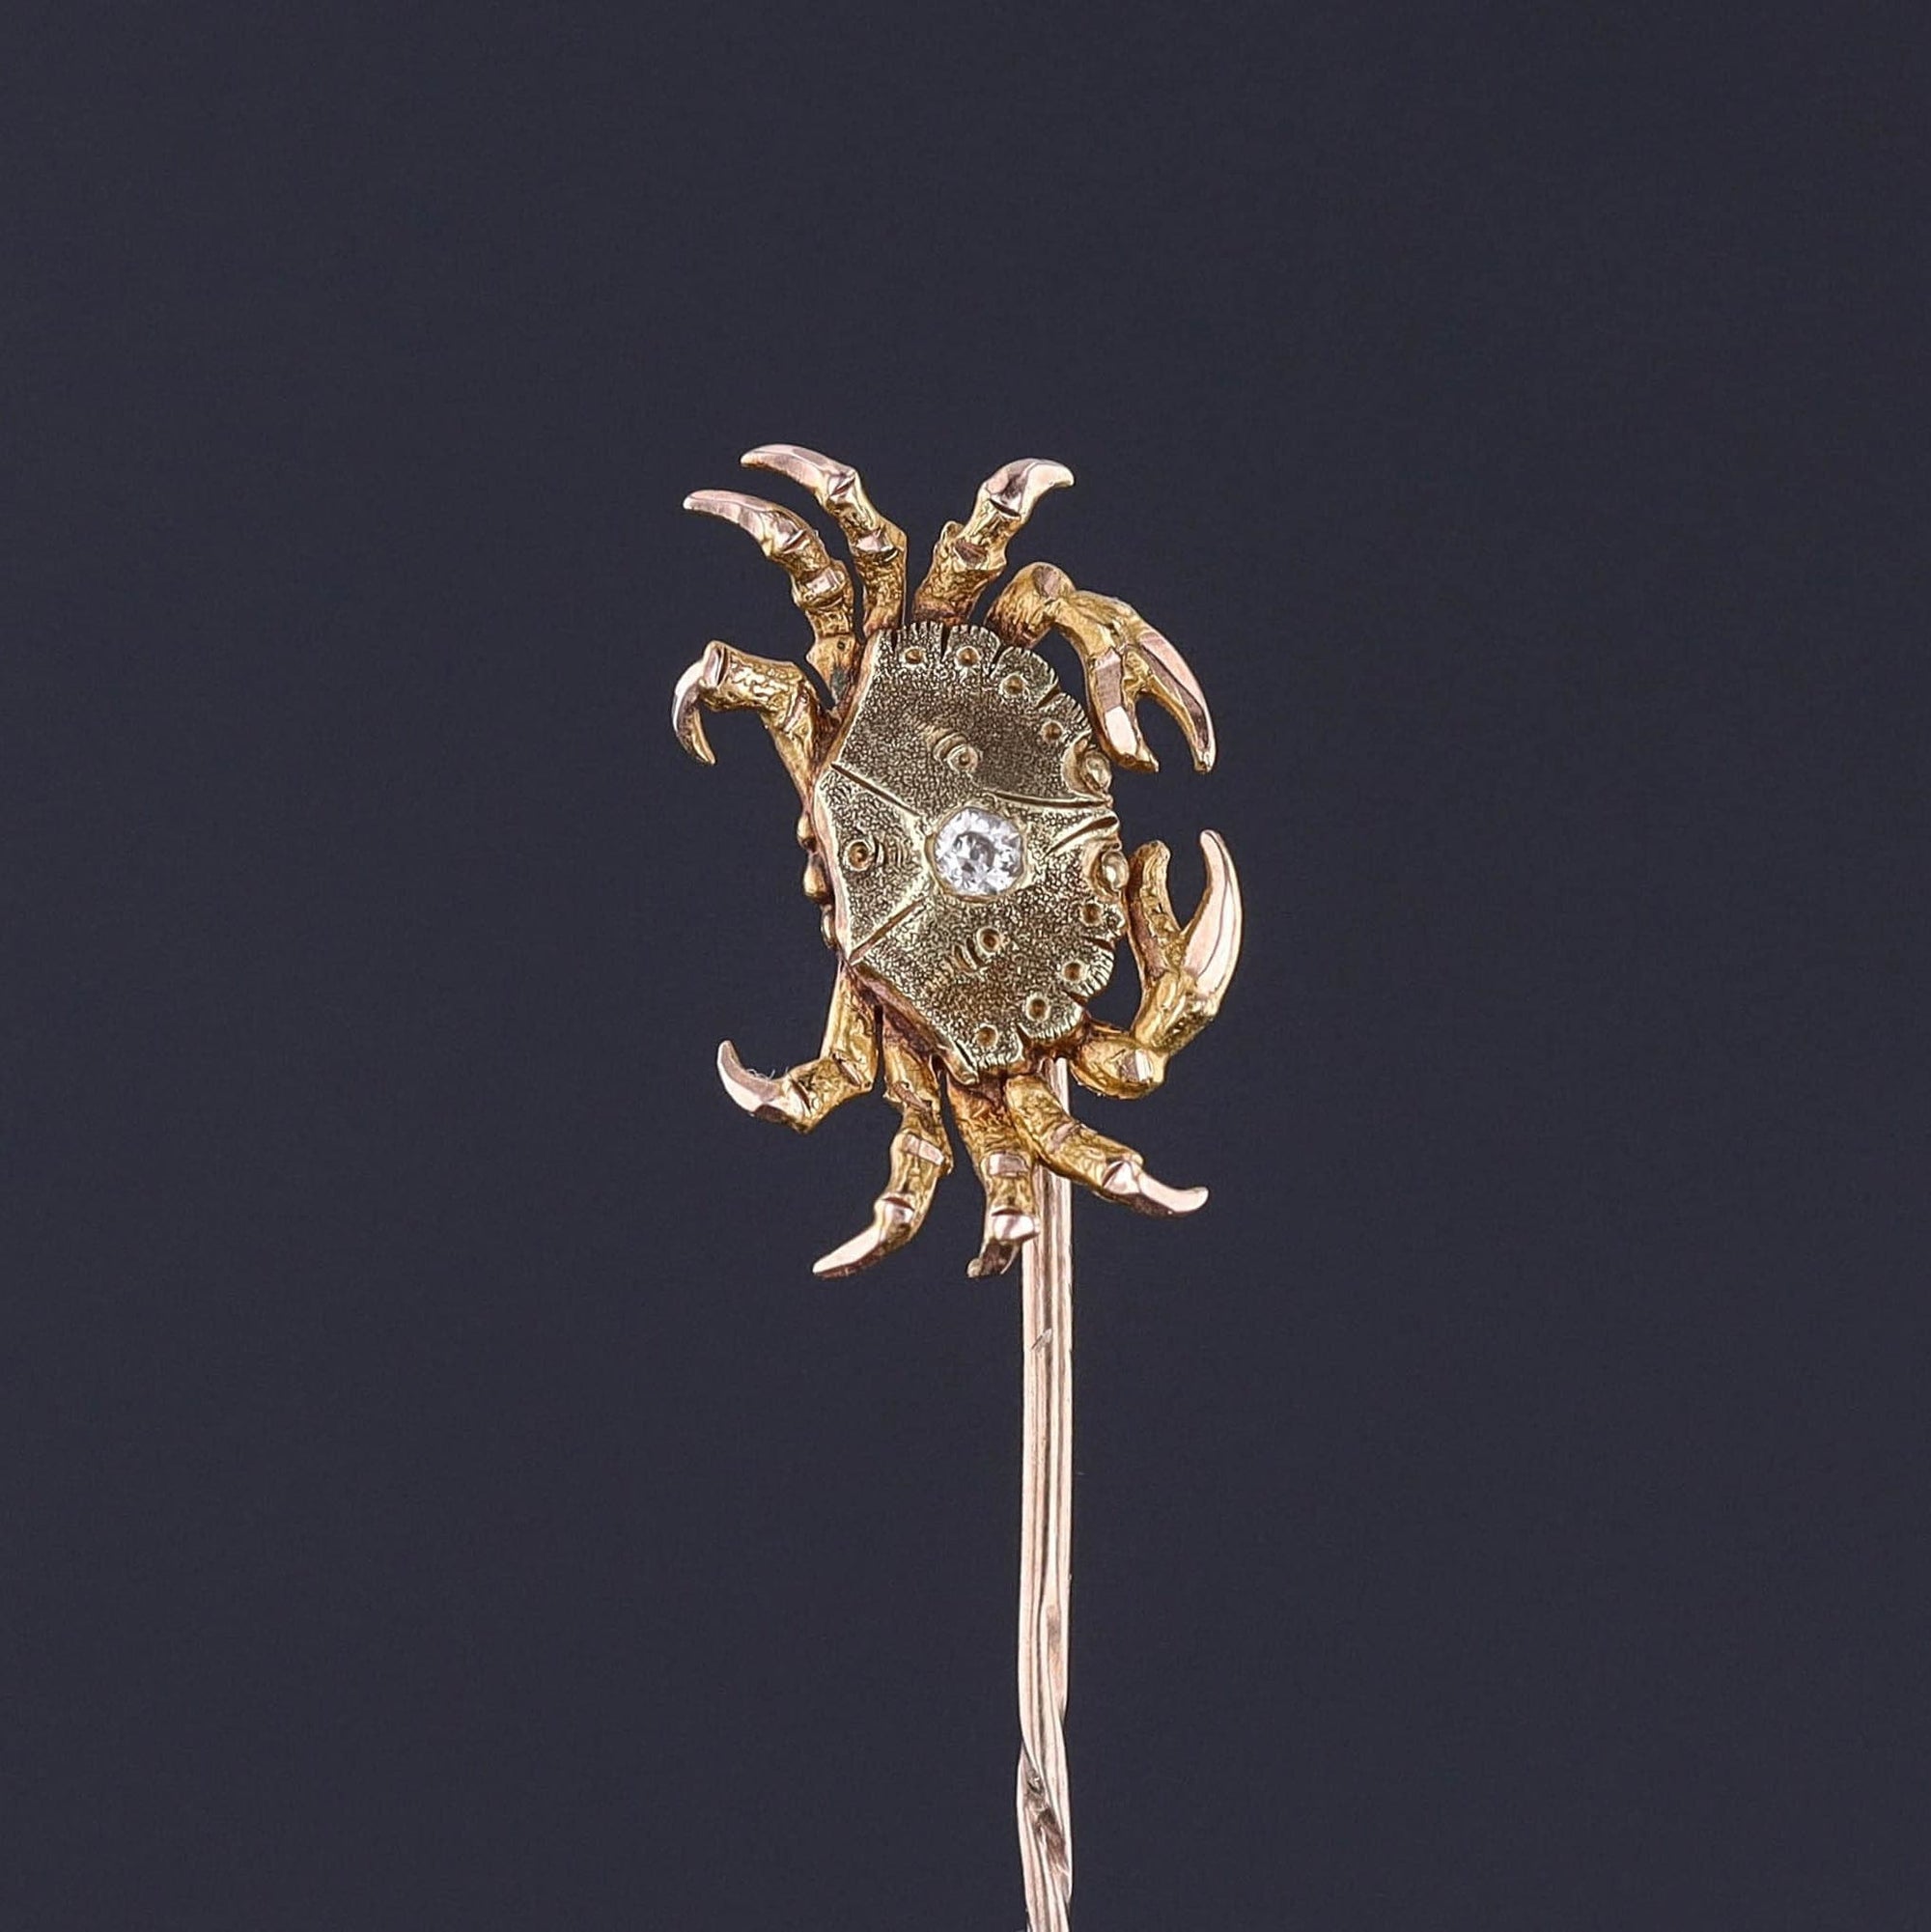 A 14k gold crab stickpin with a diamond accent. Perfect for any man or woman or collector of antique jewelry. The antique pin dates to the early 1900s and is in excellent condition.